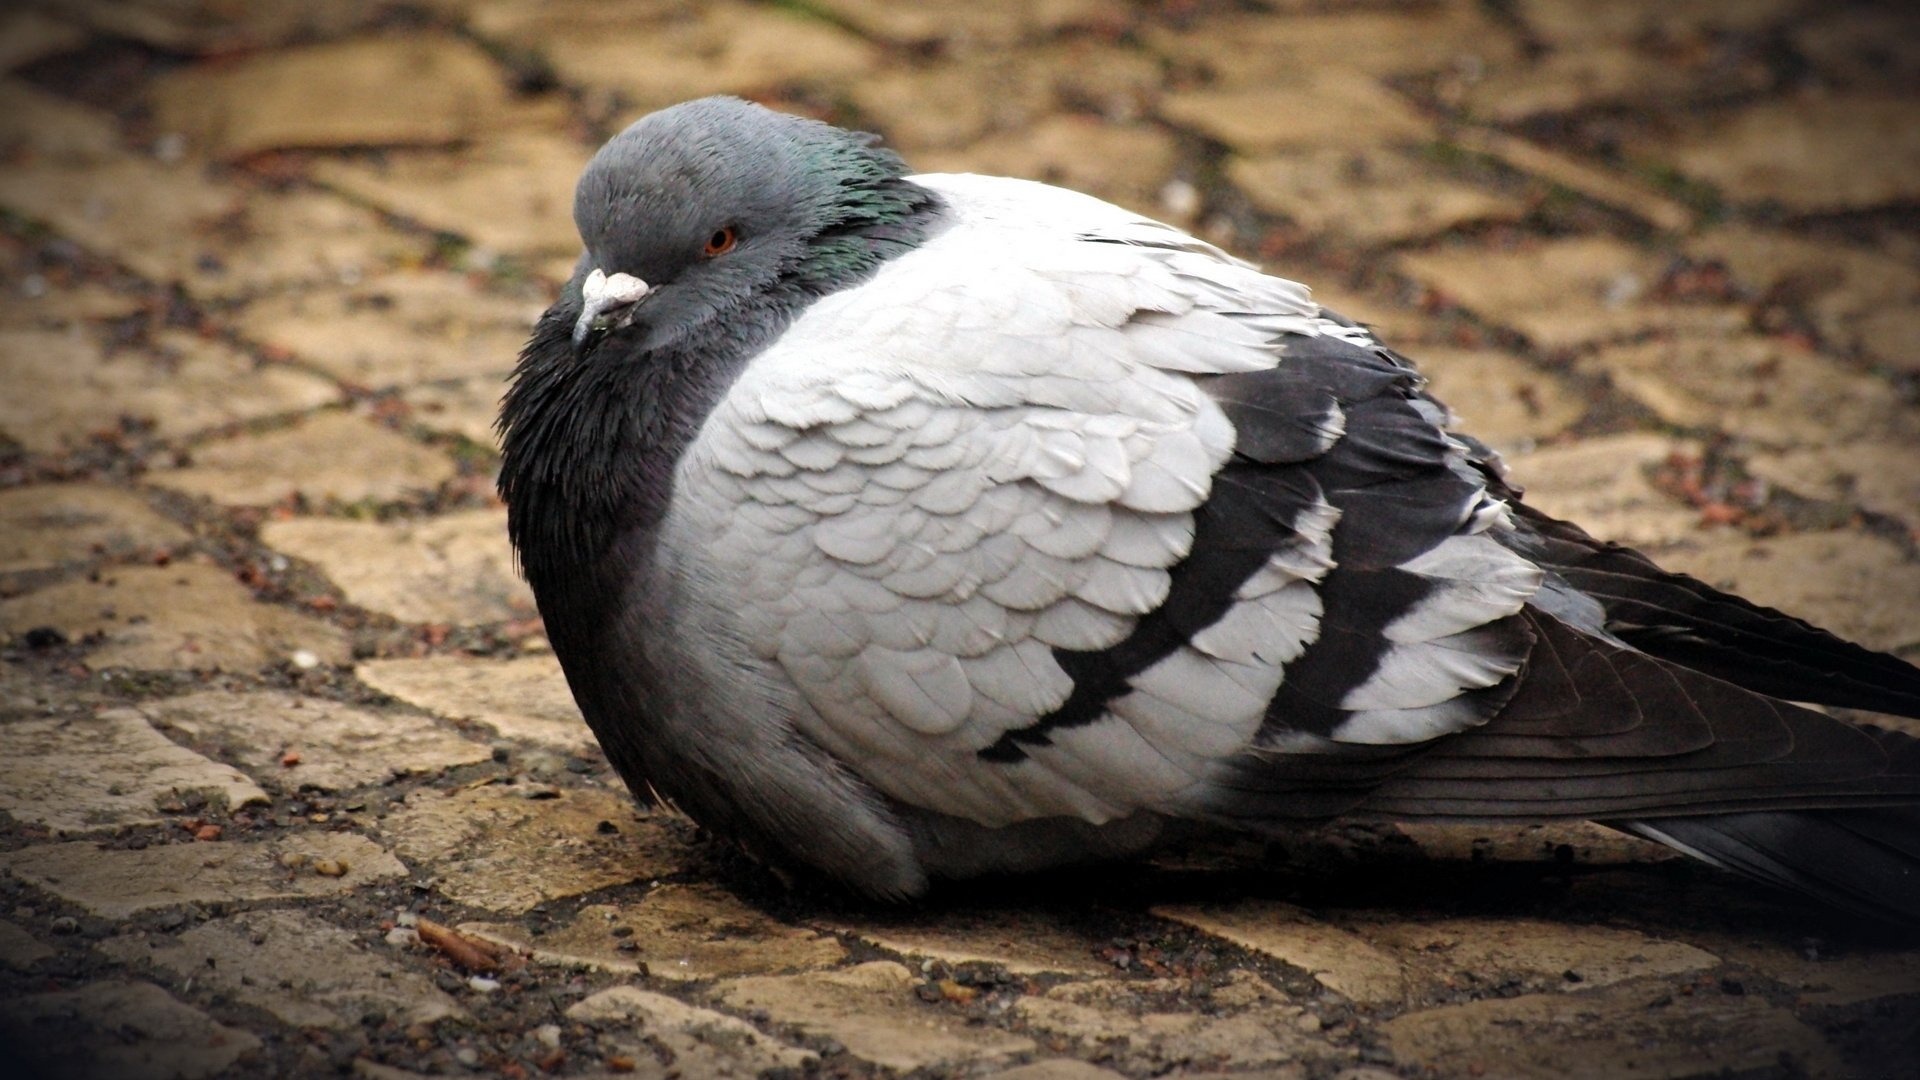 Pigeon: The pygmy dove measures only 8-10 centimeters in length. 1920x1080 Full HD Wallpaper.